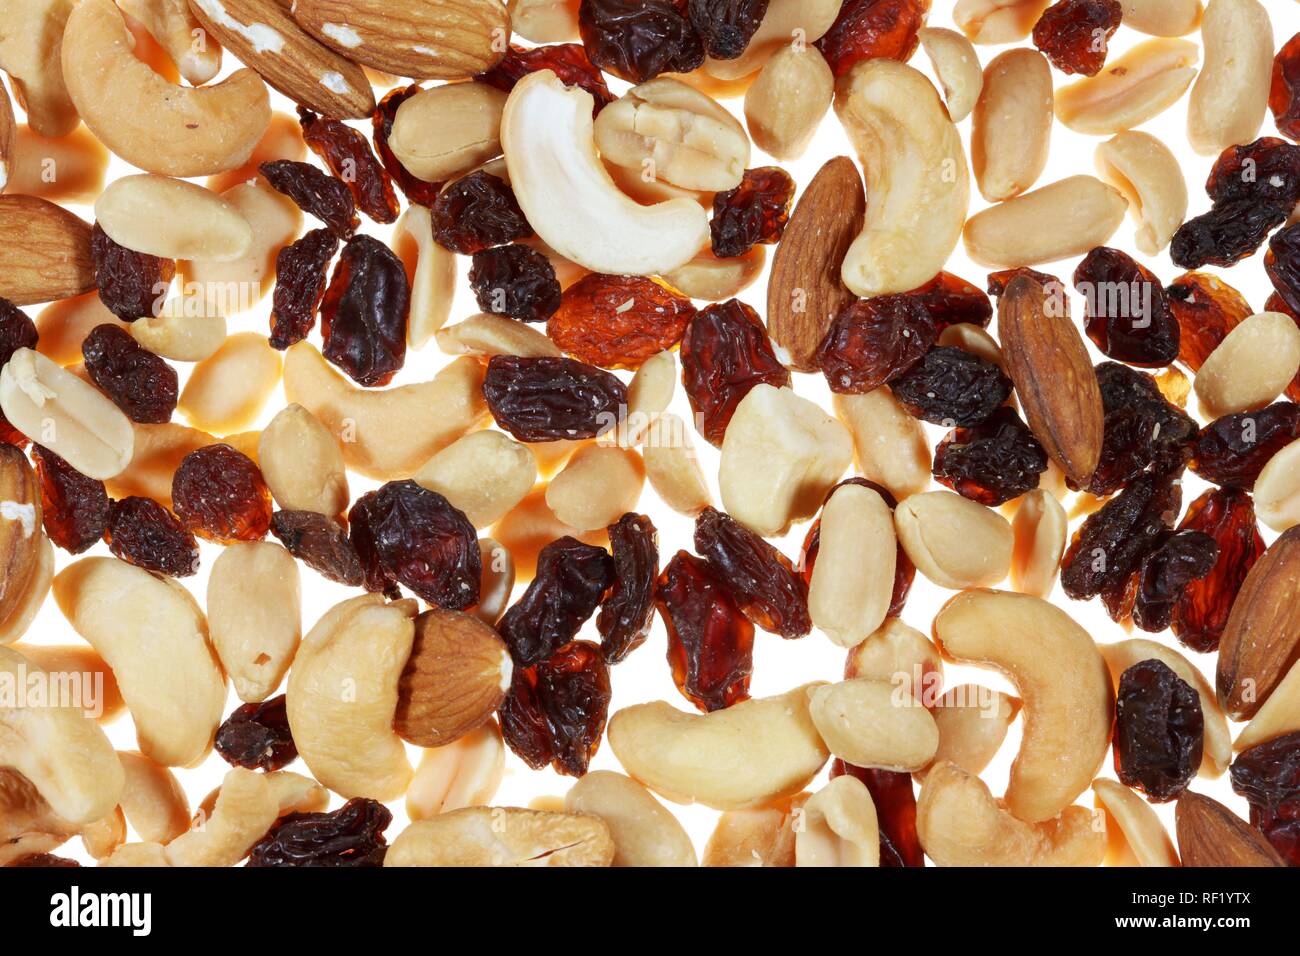 Trail mix, mixed nuts and dried fruit, raisins, almonds Stock Photo